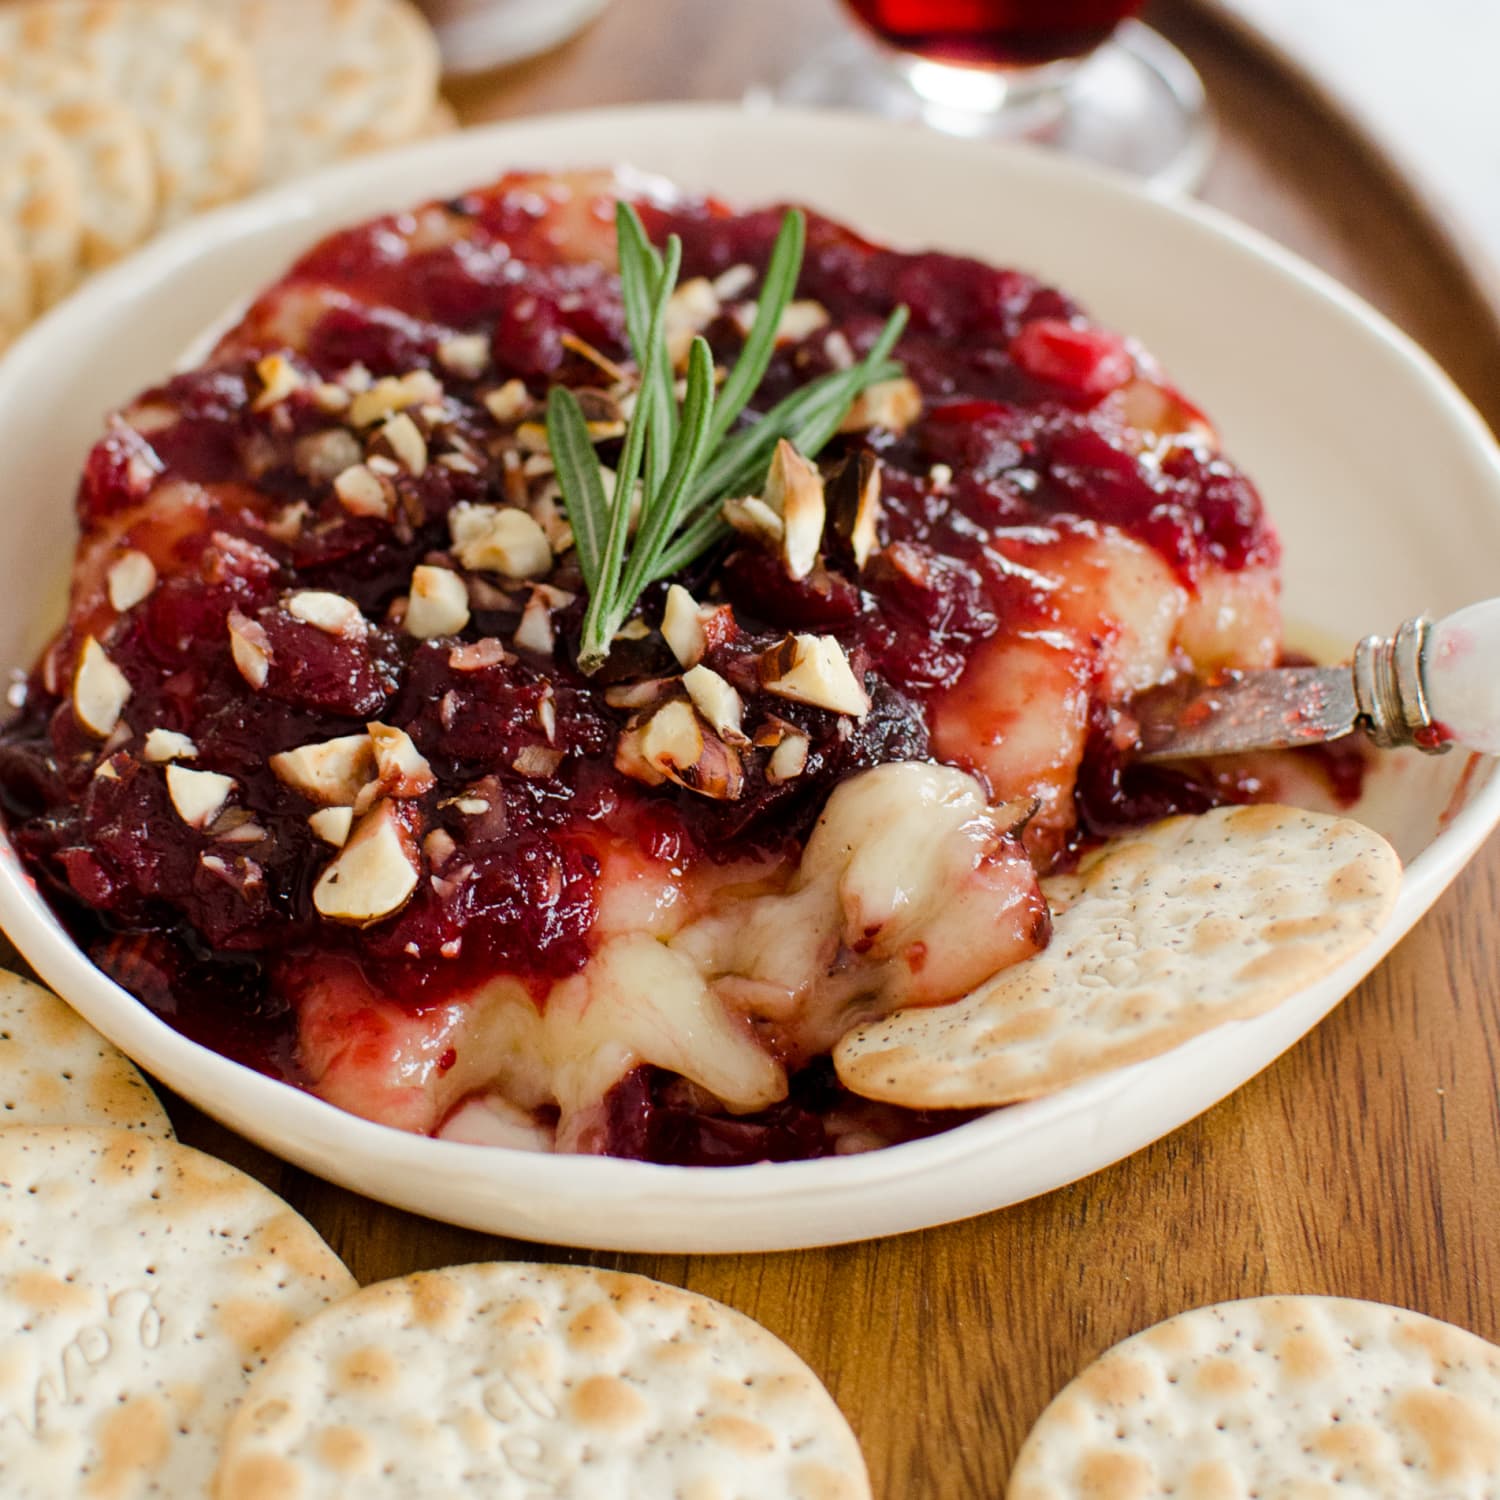 Baked Brie with Cranberry Sauce - The Toasty Kitchen